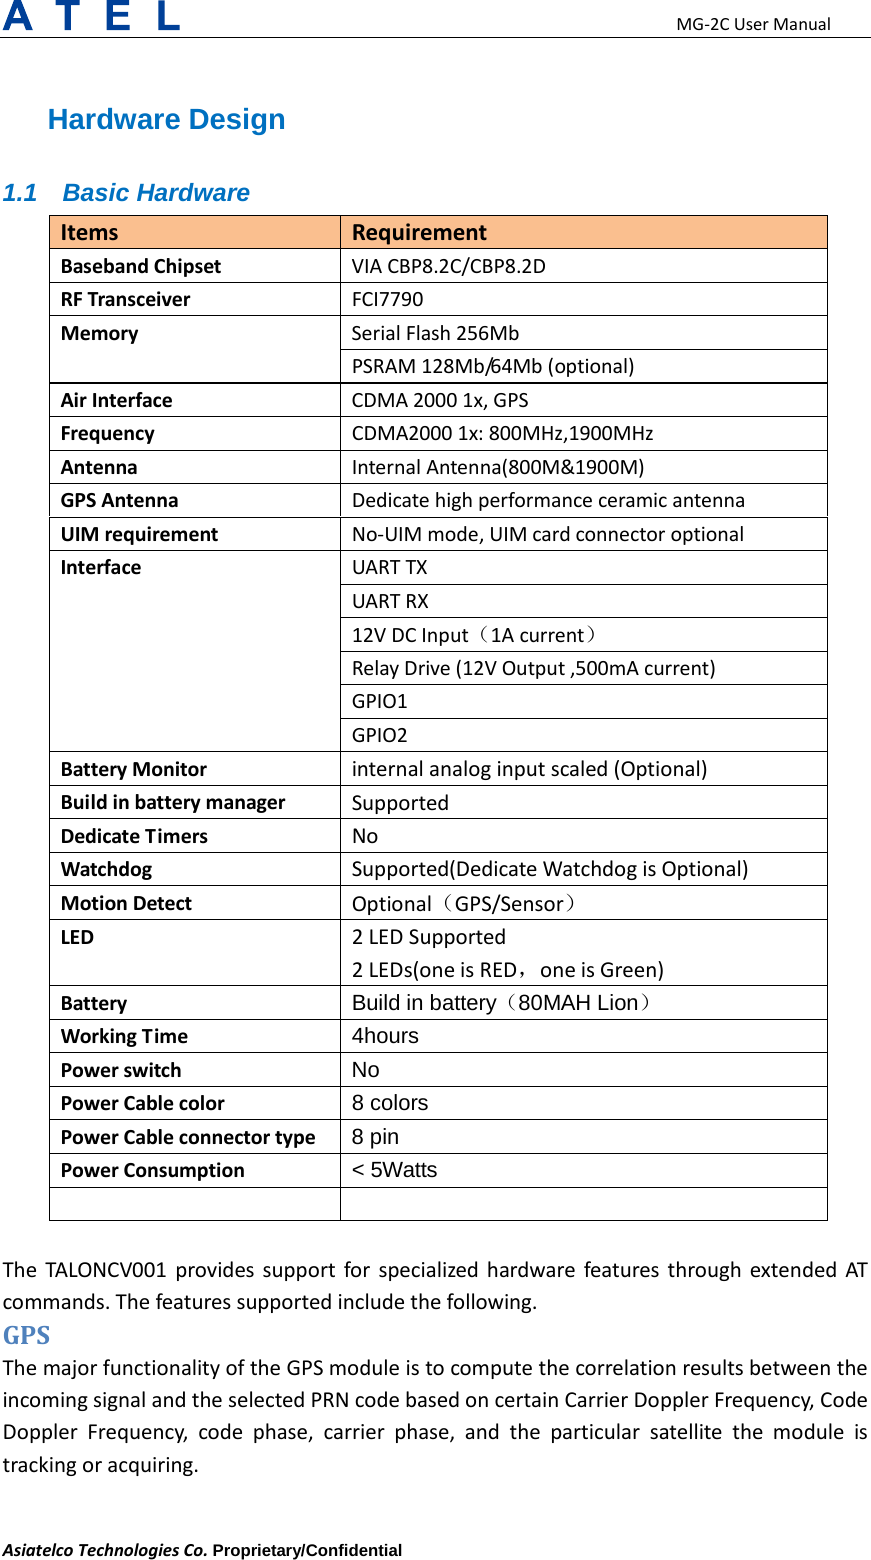                                                      MG-2C User Manual Asiatelco Technologies Co. Proprietary/Confidential     Hardware Design 1.1 Basic Hardware Items Requirement Baseband Chipset VIA CBP8.2C/CBP8.2D RF Transceiver FCI7790 Memory Serial Flash 256Mb PSRAM 128Mb/6 4 M b  (optional) Air Interface CDMA 2000 1x, GPS Frequency CDMA2000 1x: 800MHz,1900MHz Antenna Internal Antenna(800M&amp;1900M) GPS Antenna Dedicate high performance ceramic antenna UIM requirement No-UIM mode, UIM card connector optional Interface UART TX UART RX 12V DC Input（1A current） Relay Drive (12V Output ,500mA current) GPIO1 GPIO2 Battery Monitor internal analog input scaled (Optional) Build in battery manager Supported Dedicate Timers No Watchdog Supported(Dedicate Watchdog is Optional) Motion Detect Optional（GPS/Sensor） LED  2 LED Supported   2 LEDs(one is RED，one is Green) Battery Build in battery（80MAH Lion） Working Time 4hours Power switch No Power Cable color 8 colors Power Cable connector type 8 pin Power Consumption &lt; 5Watts    The  TALONCV001 provides support for specialized hardware features through extended AT commands. The features supported include the following. GPS   The major functionality of the GPS module is to compute the correlation results between the incoming signal and the selected PRN code based on certain Carrier Doppler Frequency, Code Doppler Frequency, code phase, carrier phase, and the particular satellite the module is tracking or acquiring.  